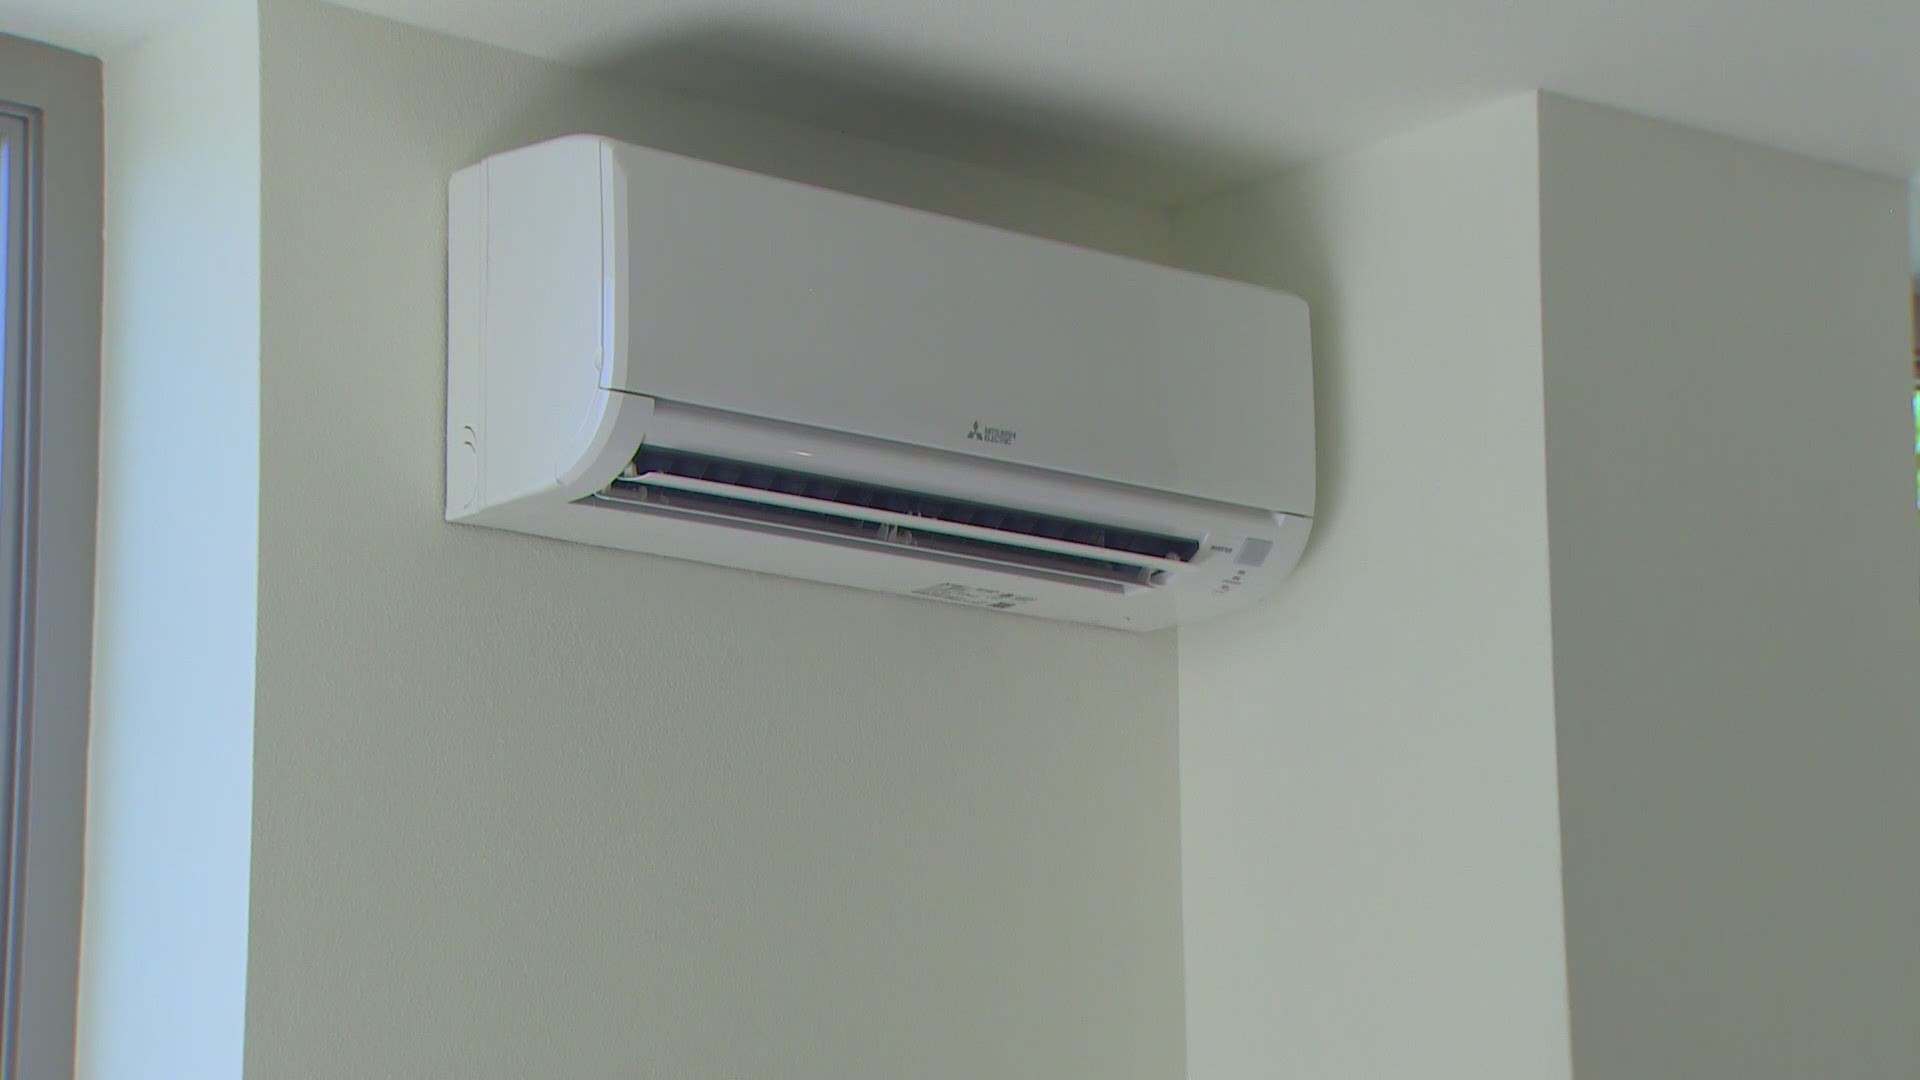 This week's soaring temperatures have some wondering about air conditioning options in their homes.